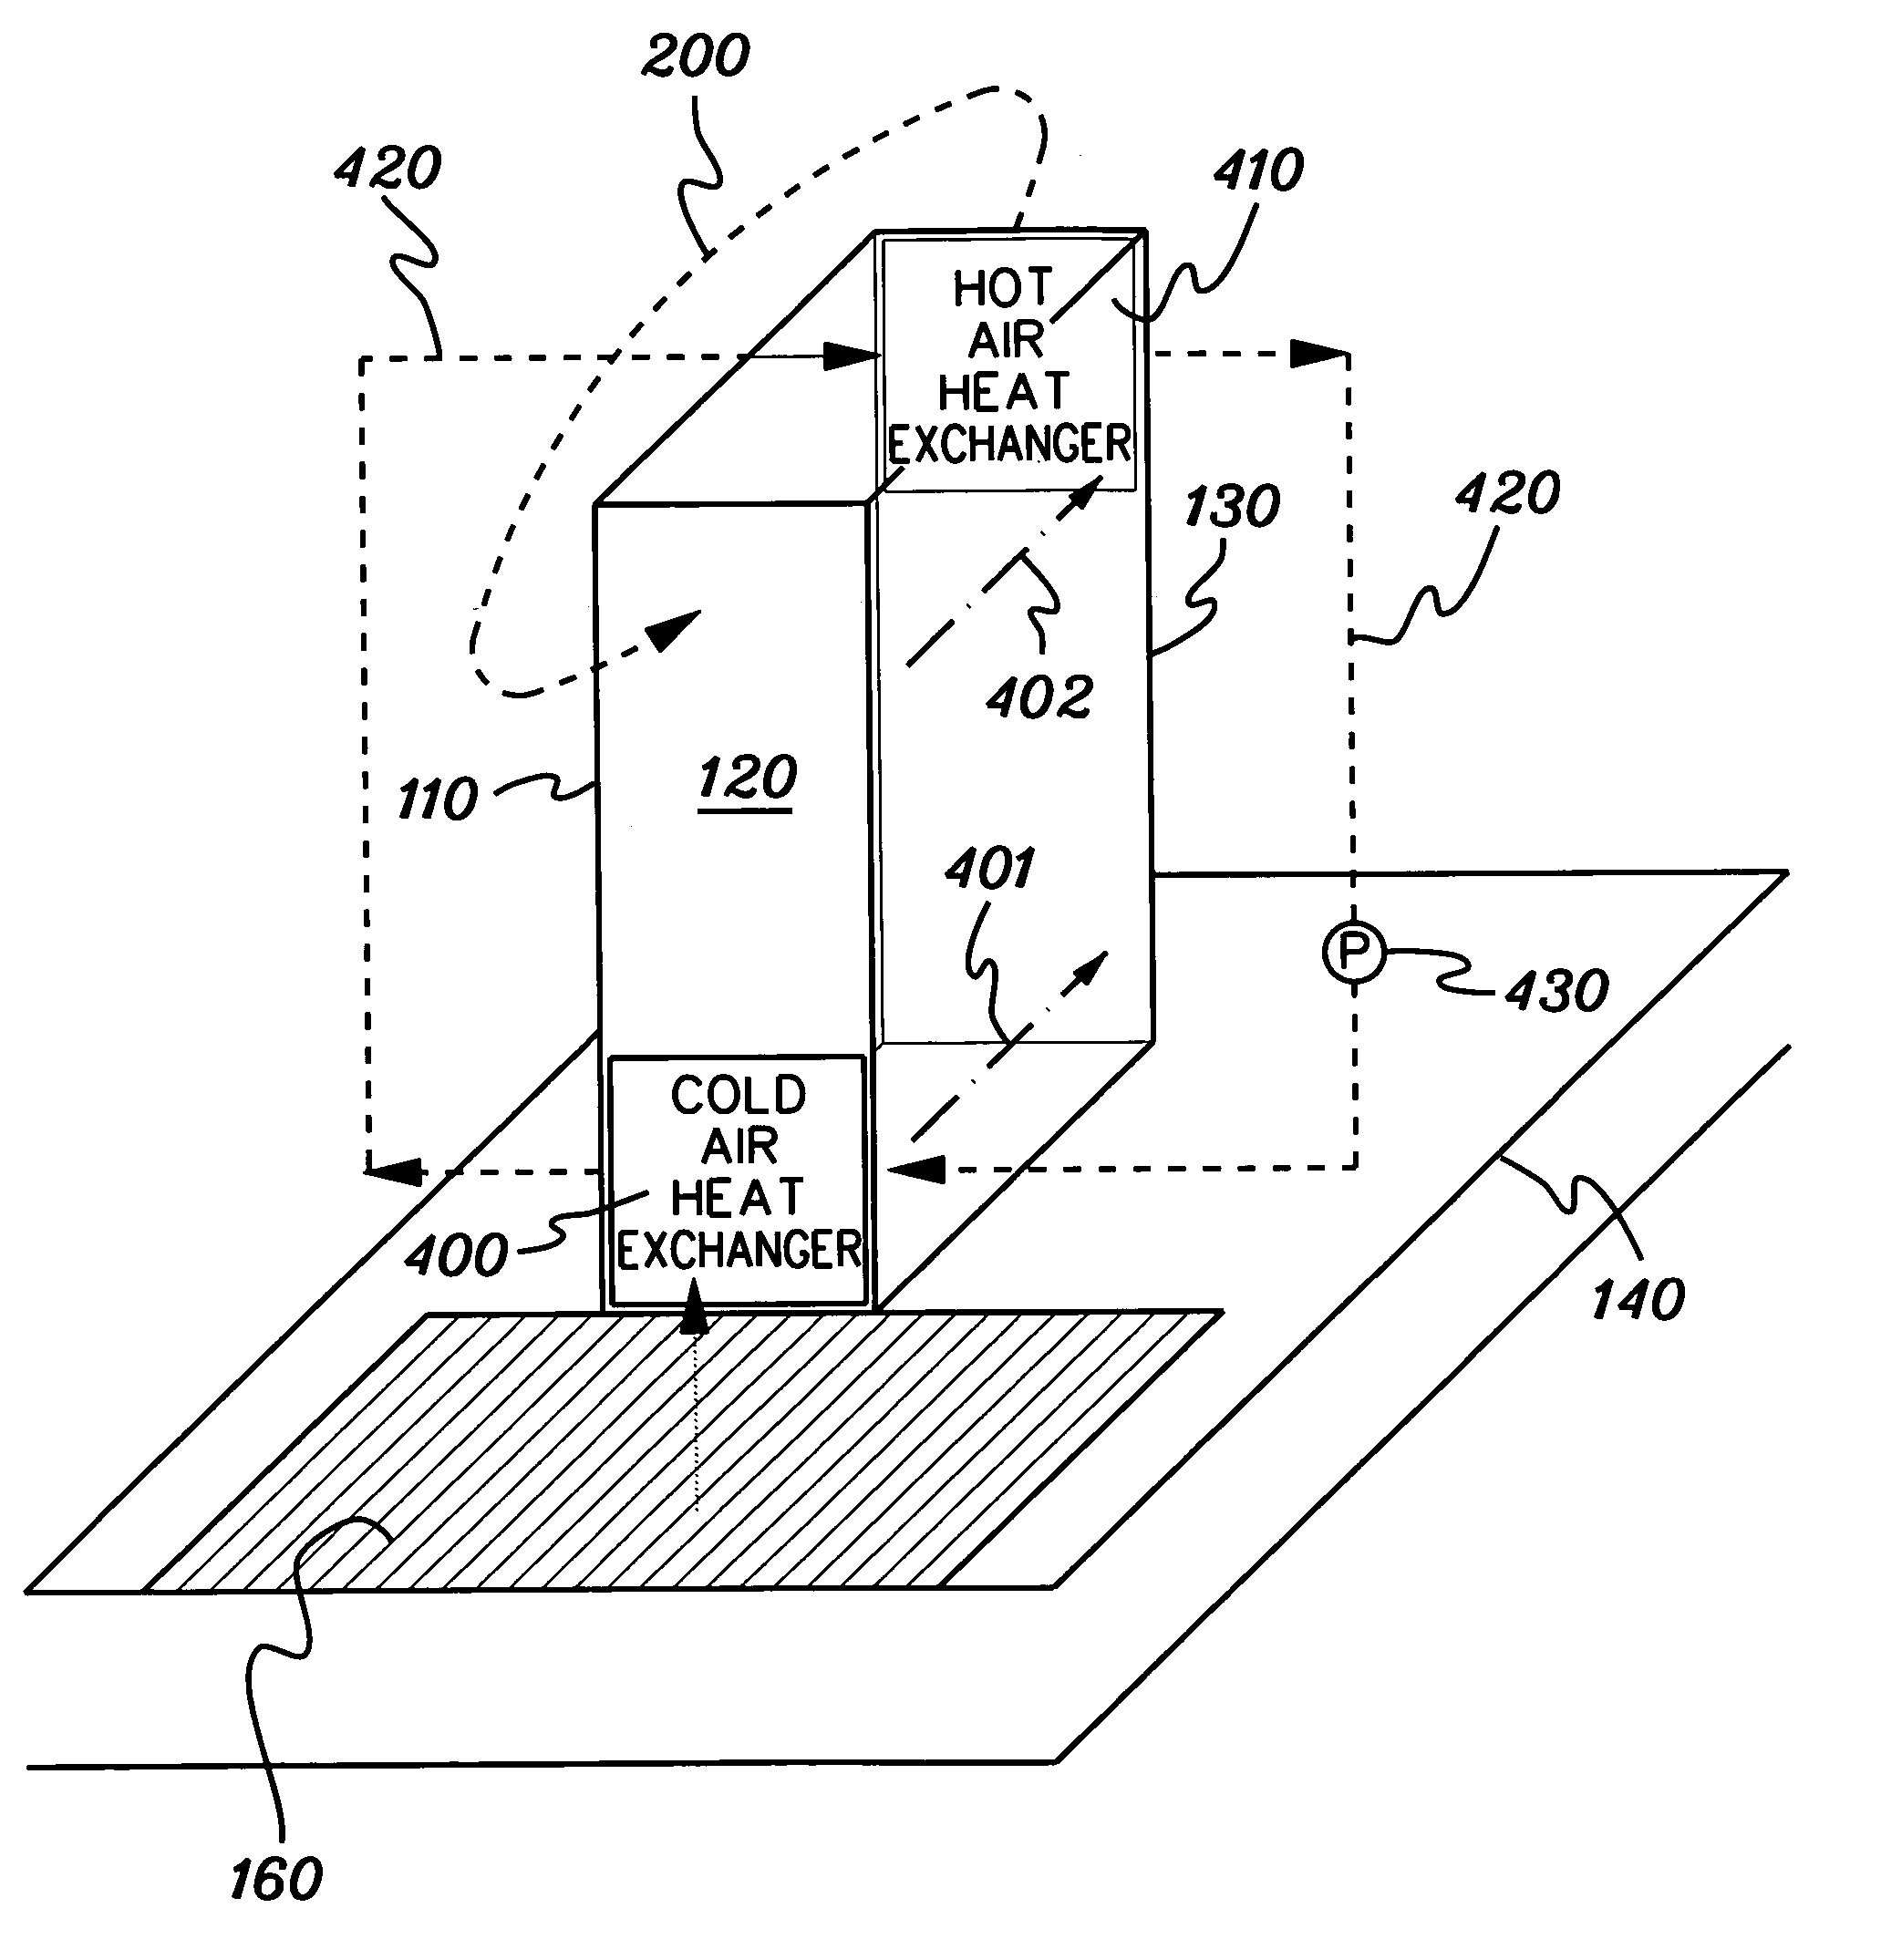 Apparatus and method for facilitating cooling of an electronics rack employing a closed loop heat exchange system